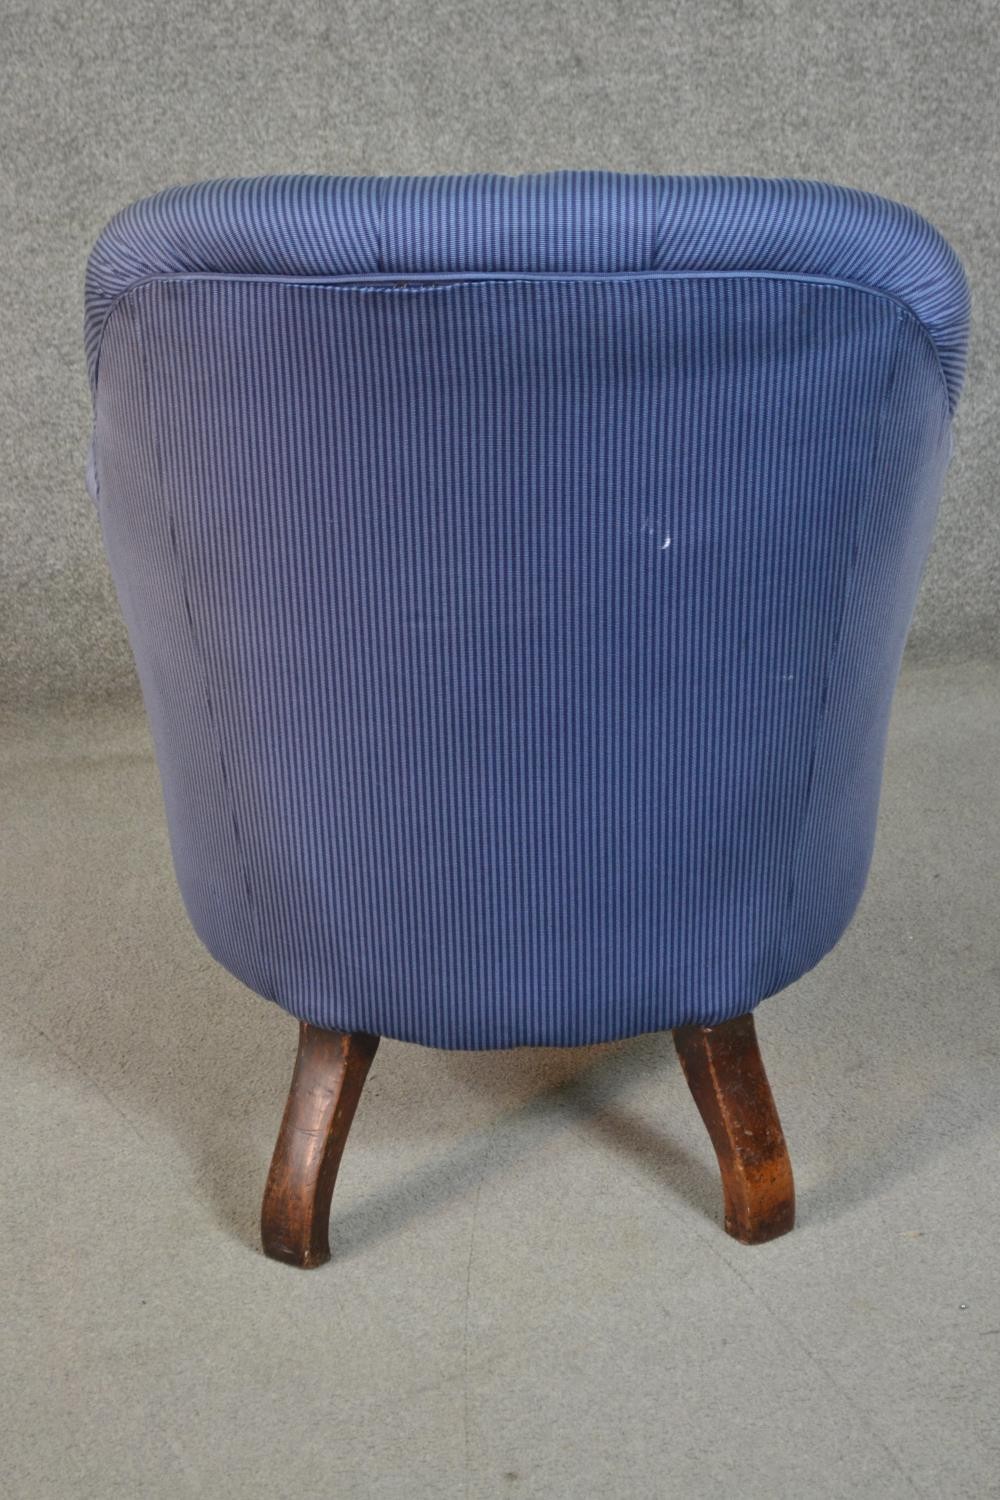 A circa 1830s mahogany tub armchair, upholstered in striped blue fabric, with a button back, the - Image 4 of 7